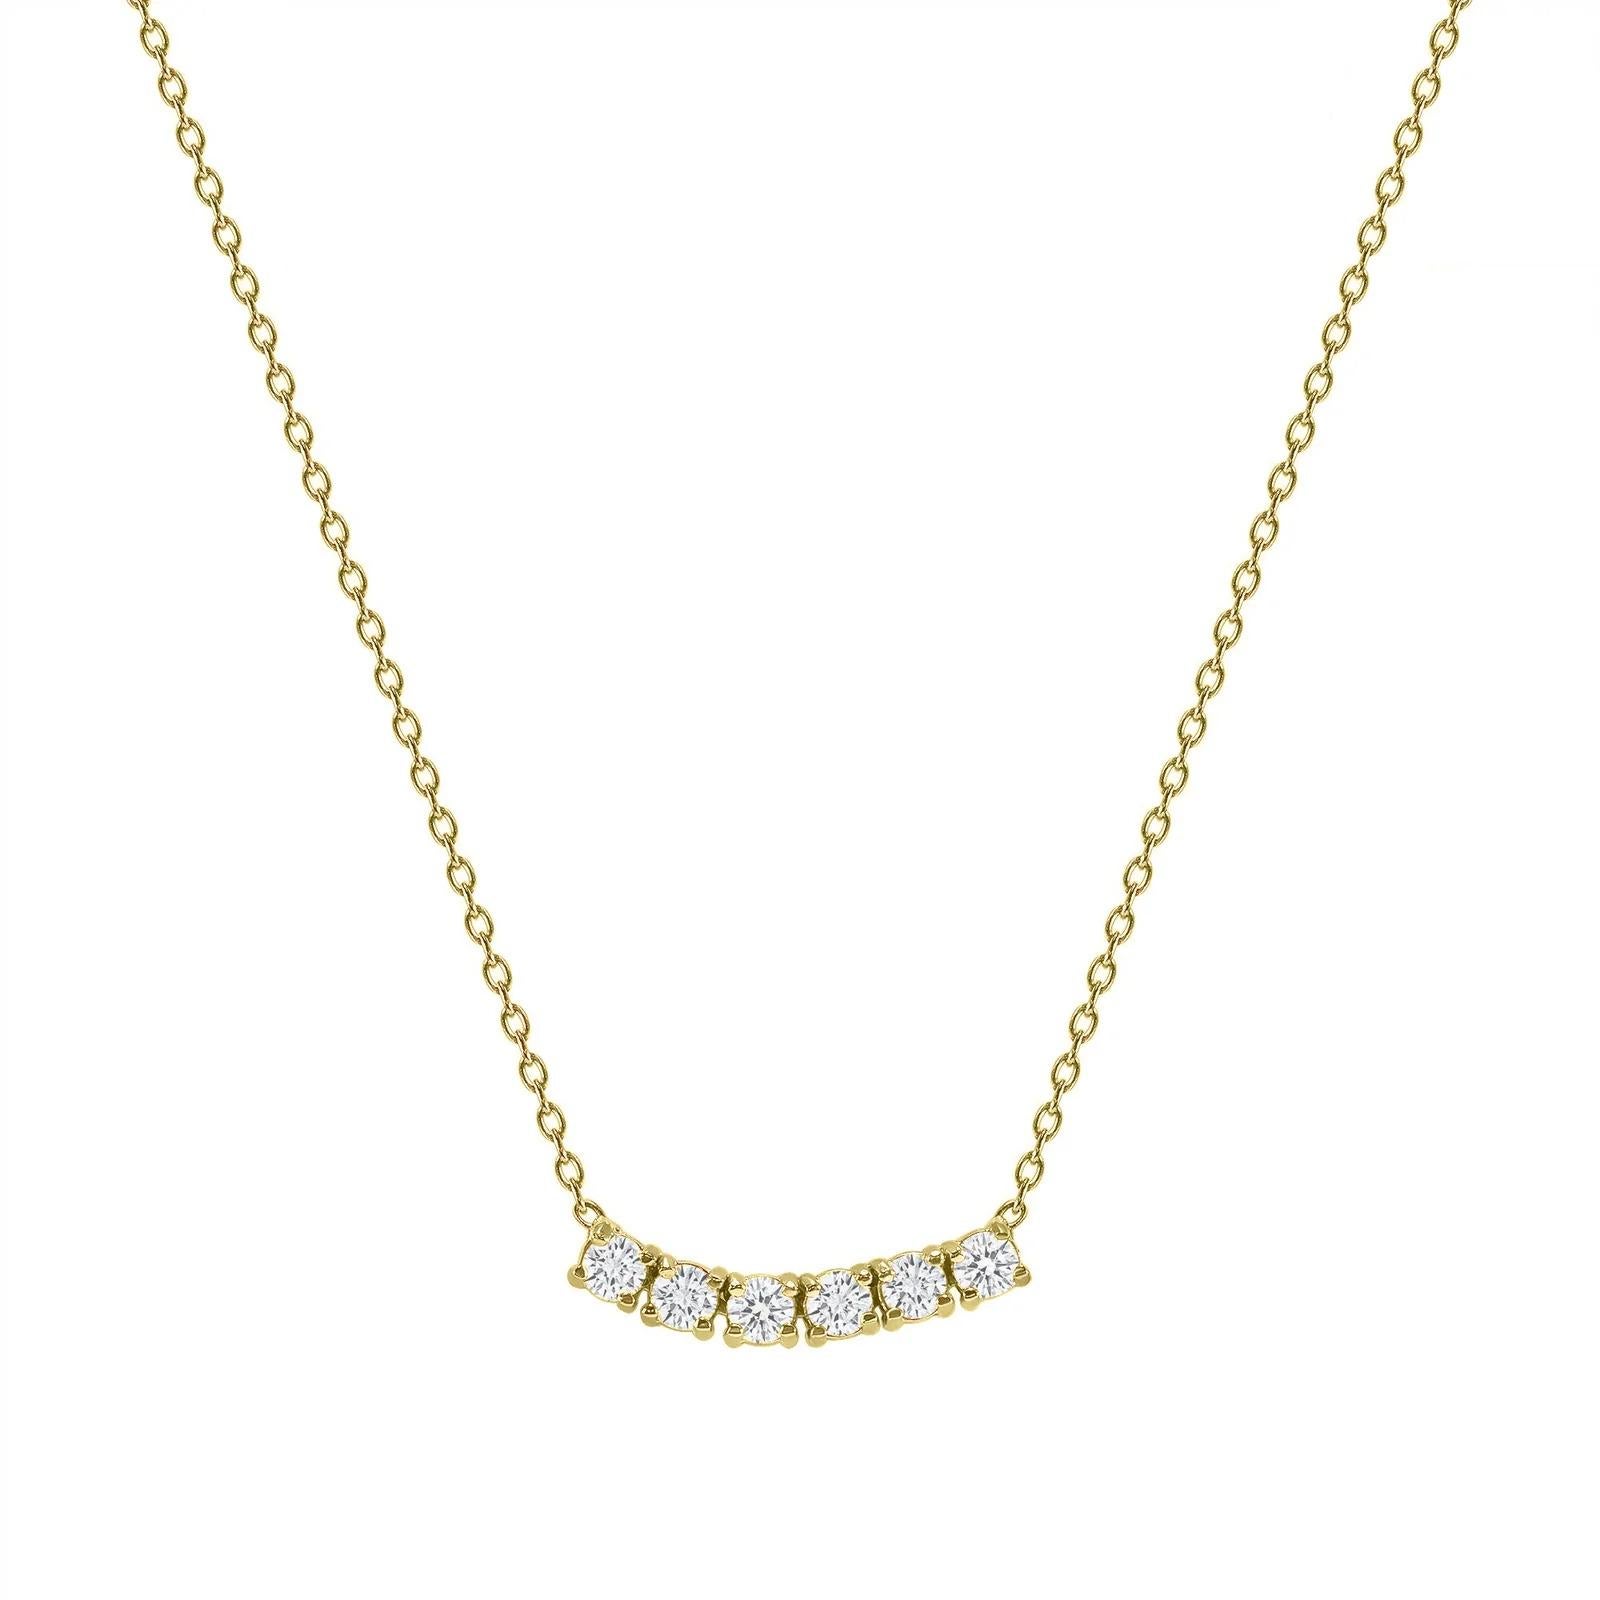 This petite, curved diamond necklace is crafted with gorgeous 14k gold set with six round diamonds.  

Gold: 14k 
Diamond Total Carats: 1 ct
Diamond Cut: Round (6 diamonds)
Diamond Clarity: VS
Diamond Color: F
Color: Yellow Gold
Necklace Length: 18